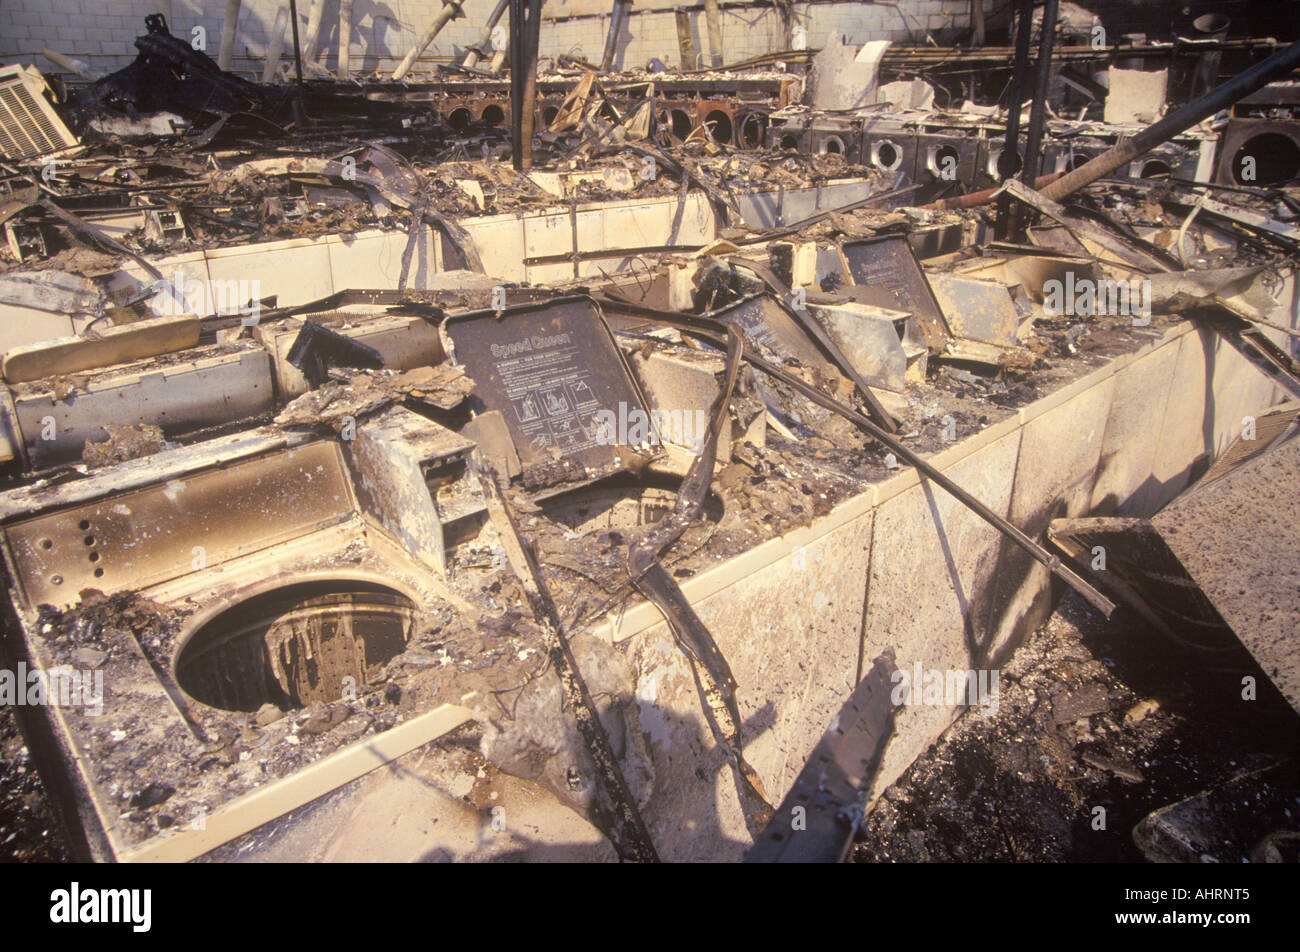 Laundromat burned out during 1992 riots South Central Los Angeles California Stock Photo